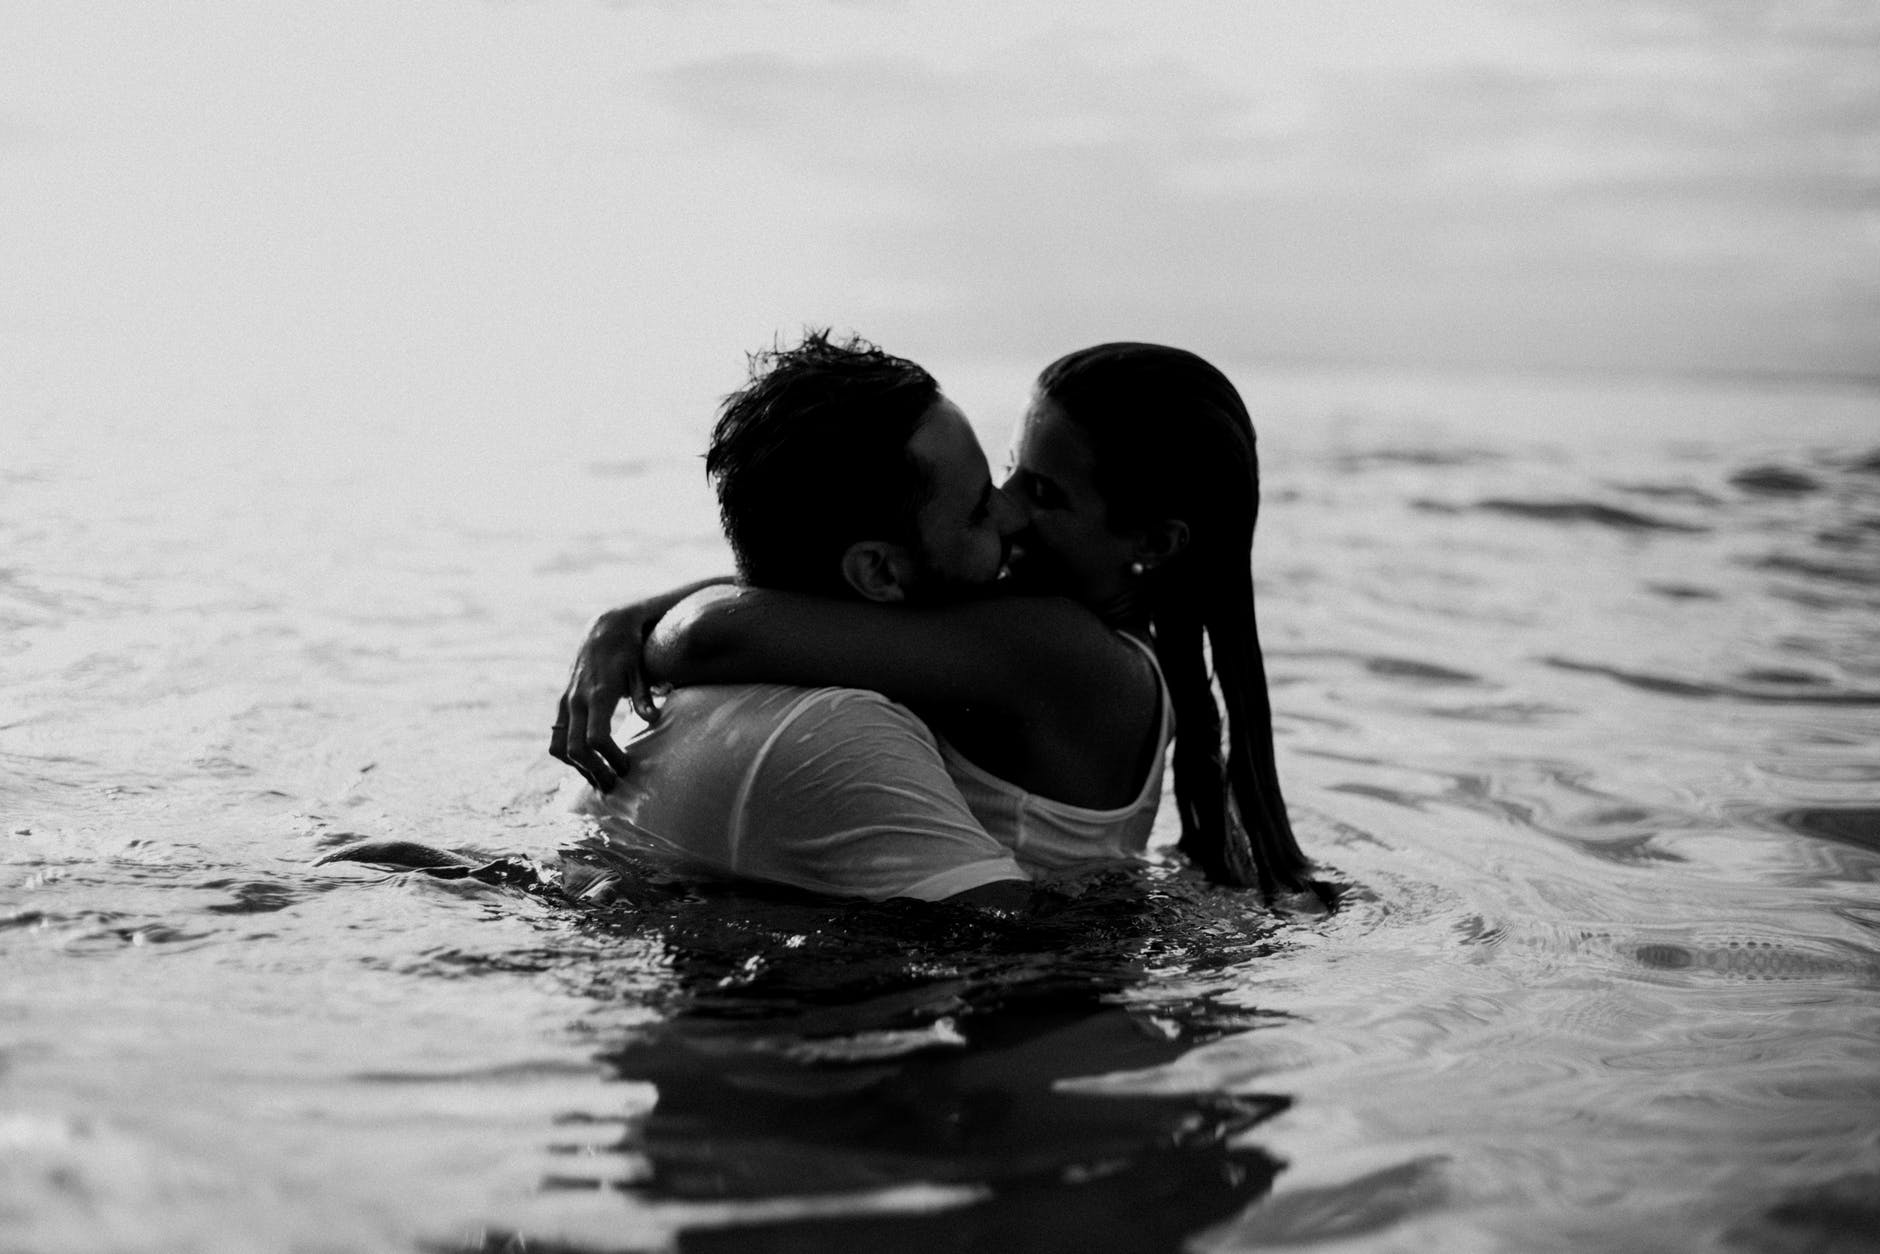 Black and white photo of a couple kissing in the water. They are both dressed in white, soaked, and look joyful.